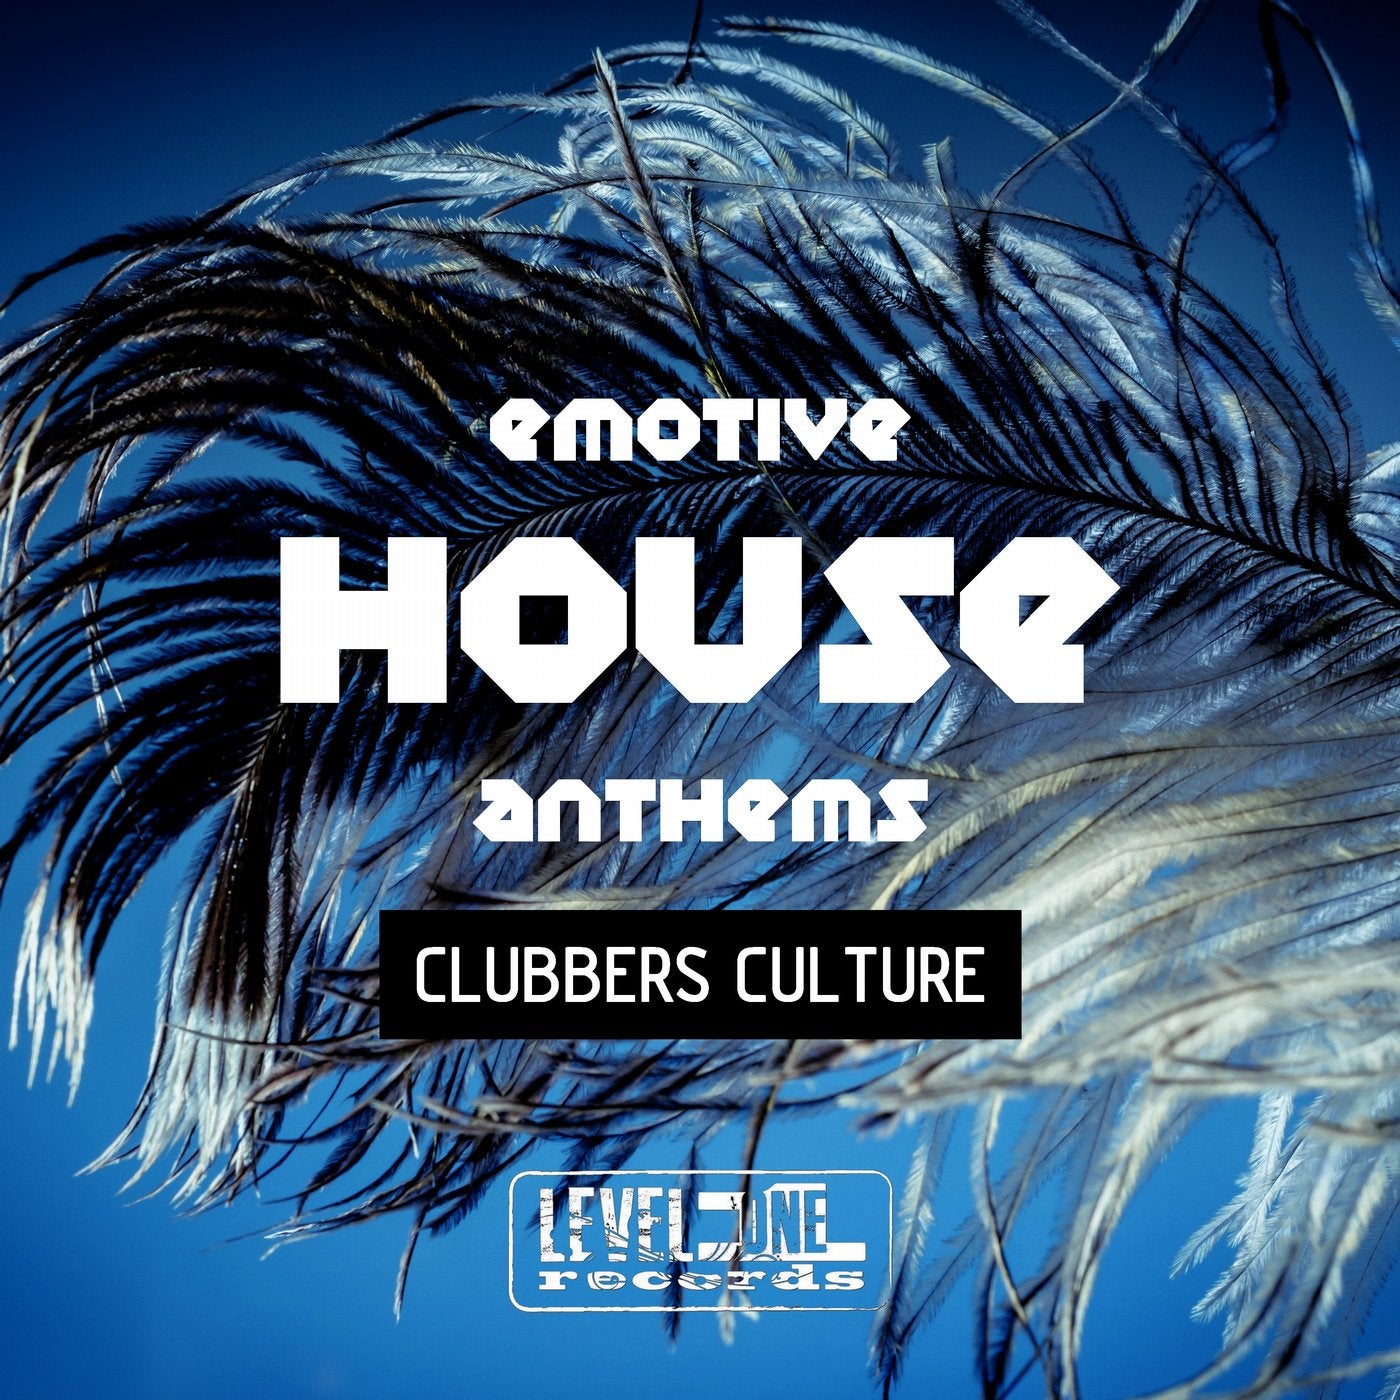 Emotive House Anthems (Clubbers Culture)